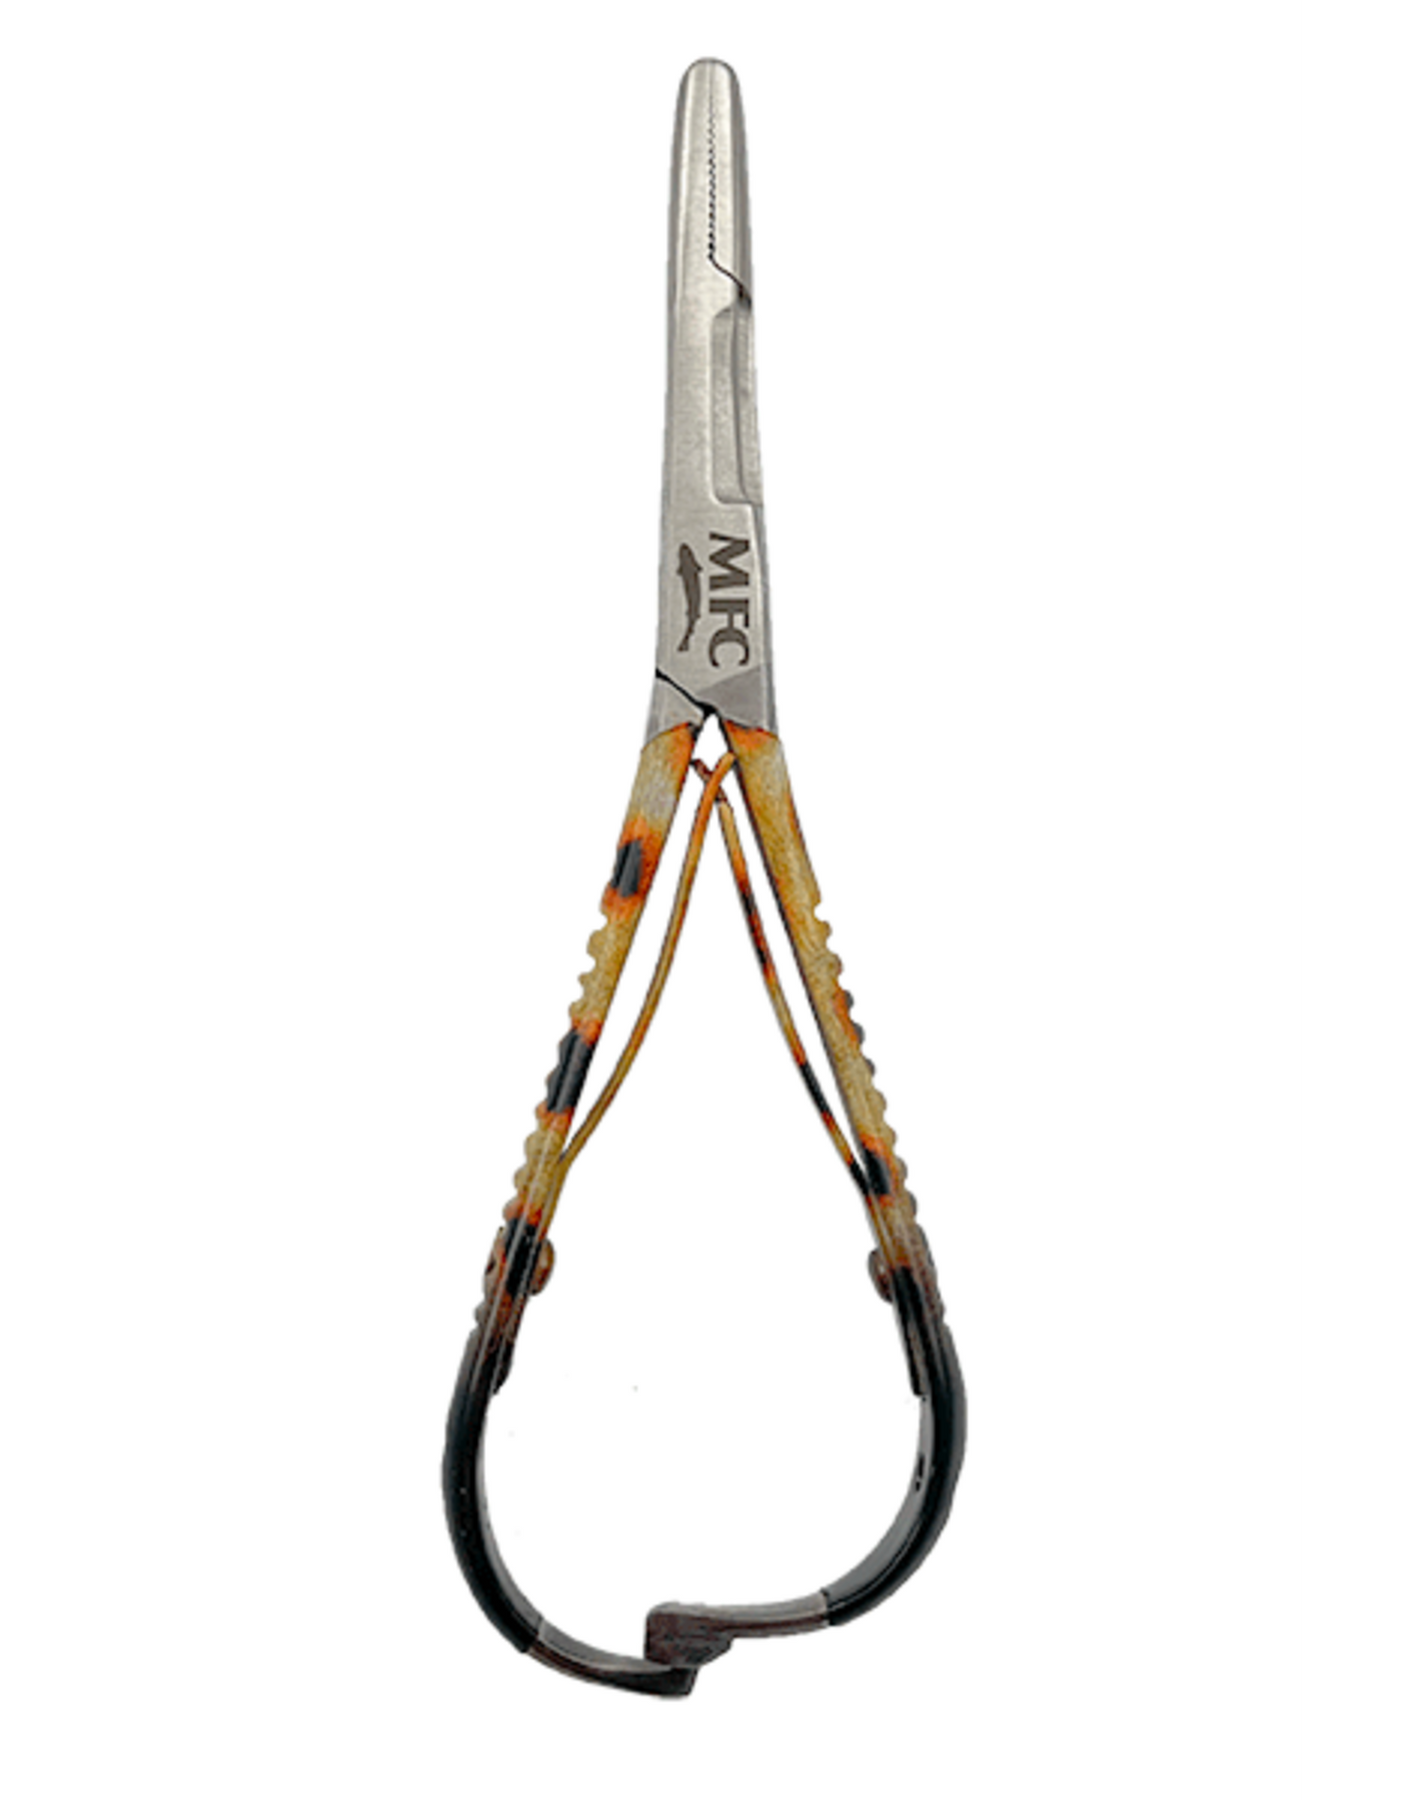 MFC River Camo 5 Forceps - Madison River Outfitters